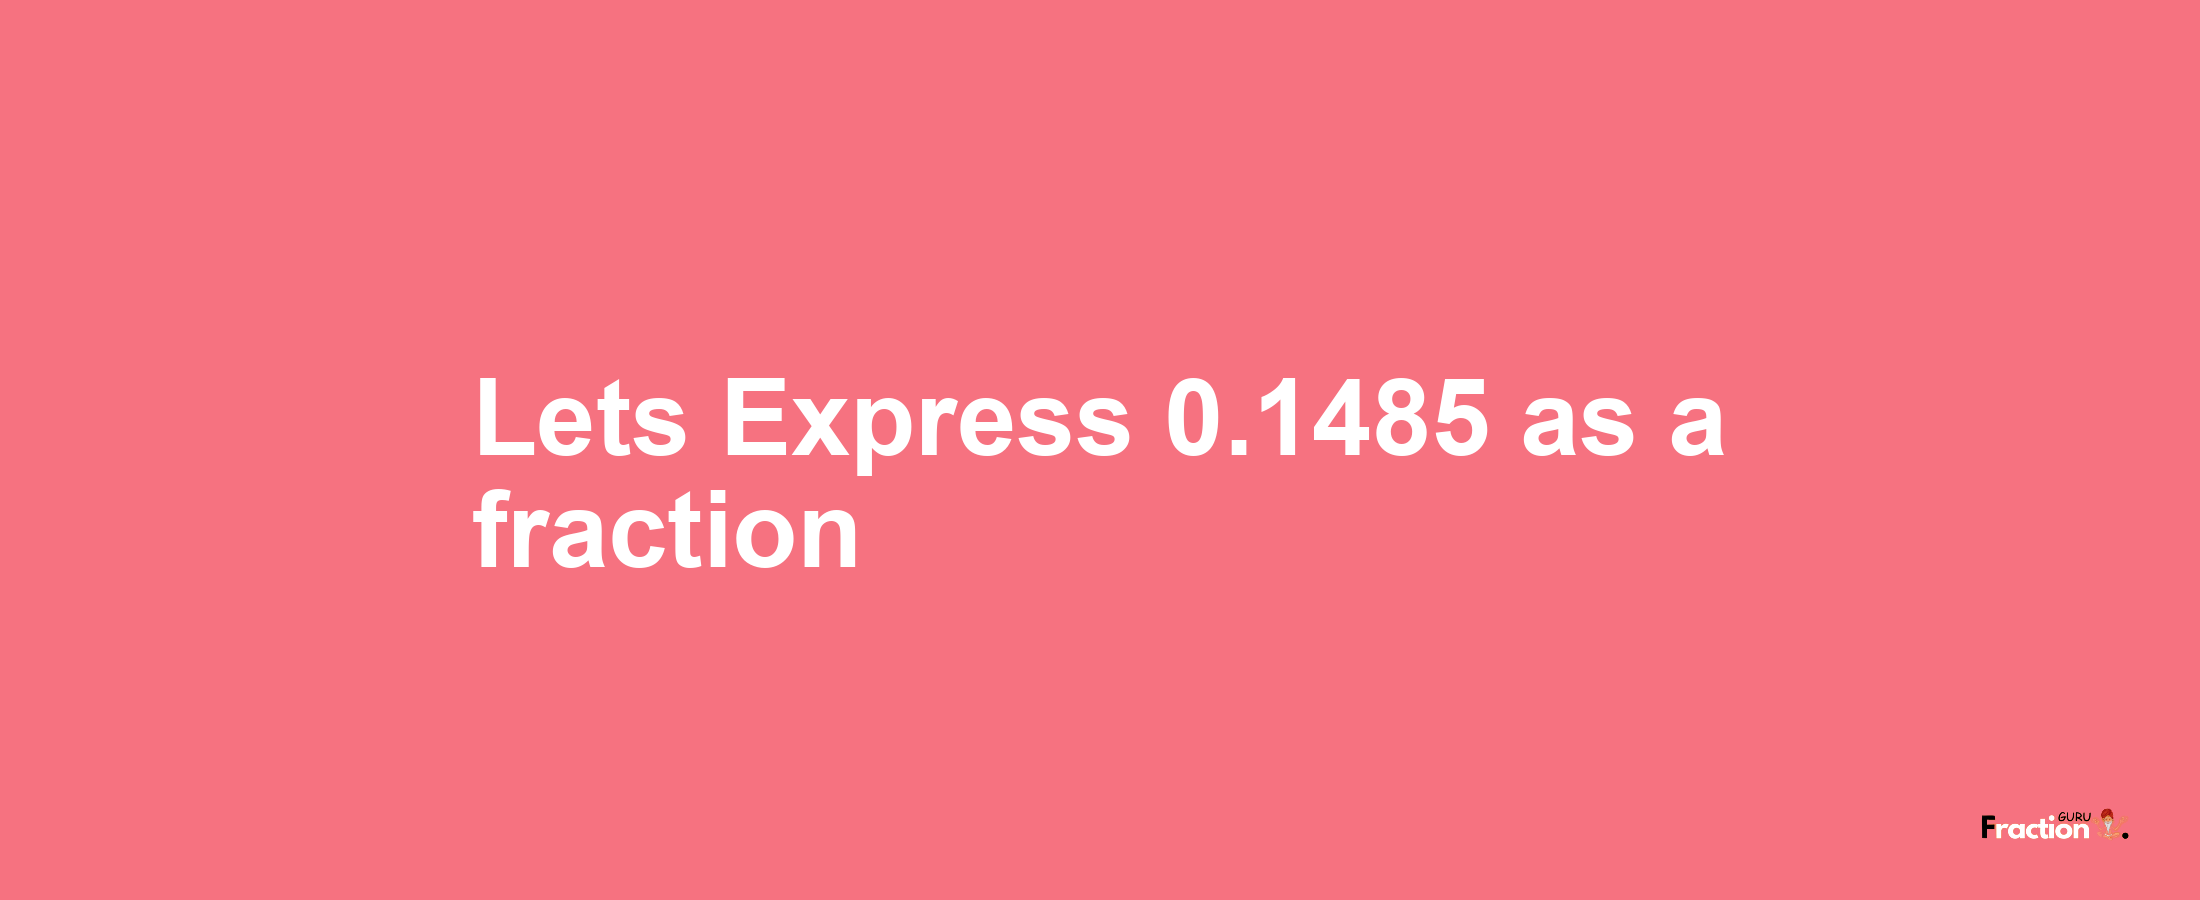 Lets Express 0.1485 as afraction